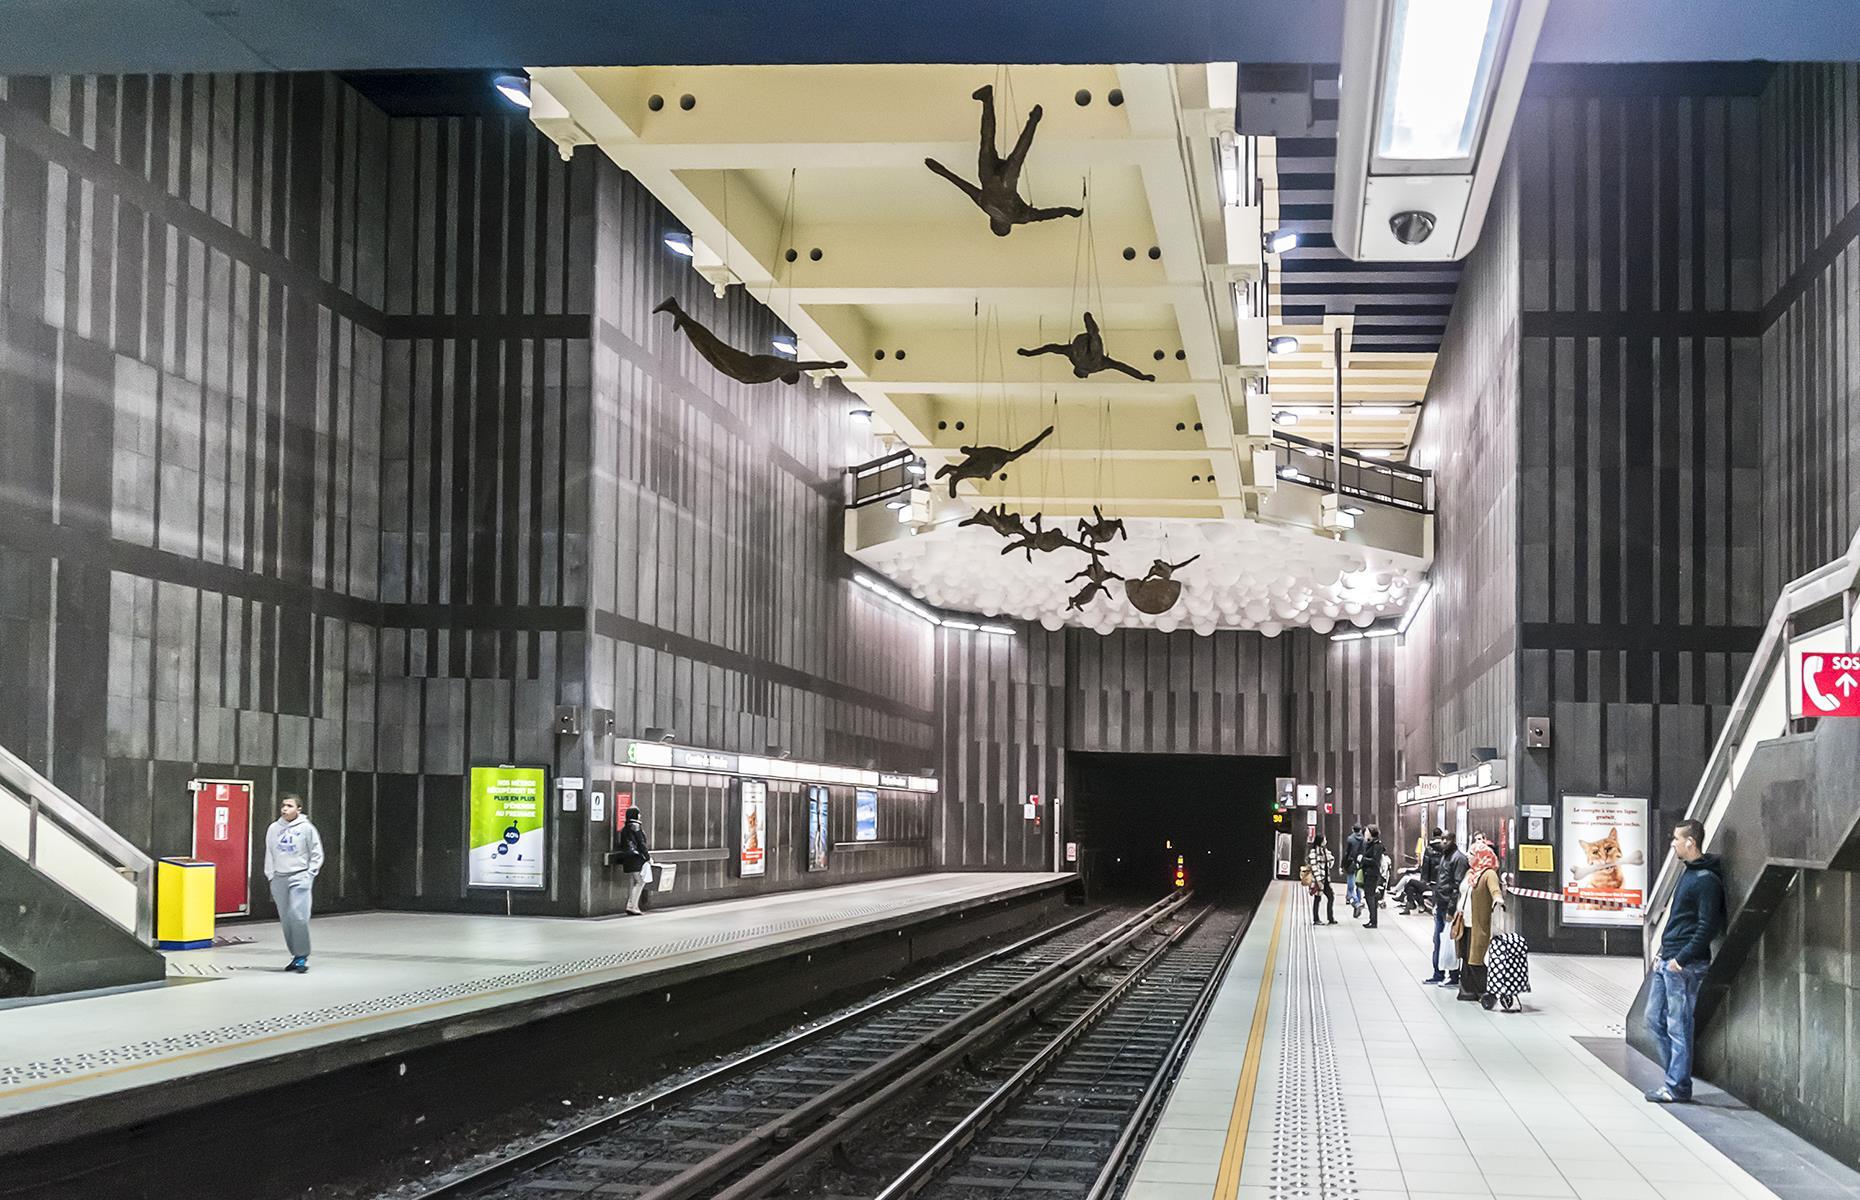 <p>When leaving the train at this station don’t forget to look up: tilt your head and you’ll find 16 mannequins suspended from the ceiling. Created by artist Paul van Hoeydonck, the installation titled <em>16 x Icarus</em> looks eerily realistic.</p>